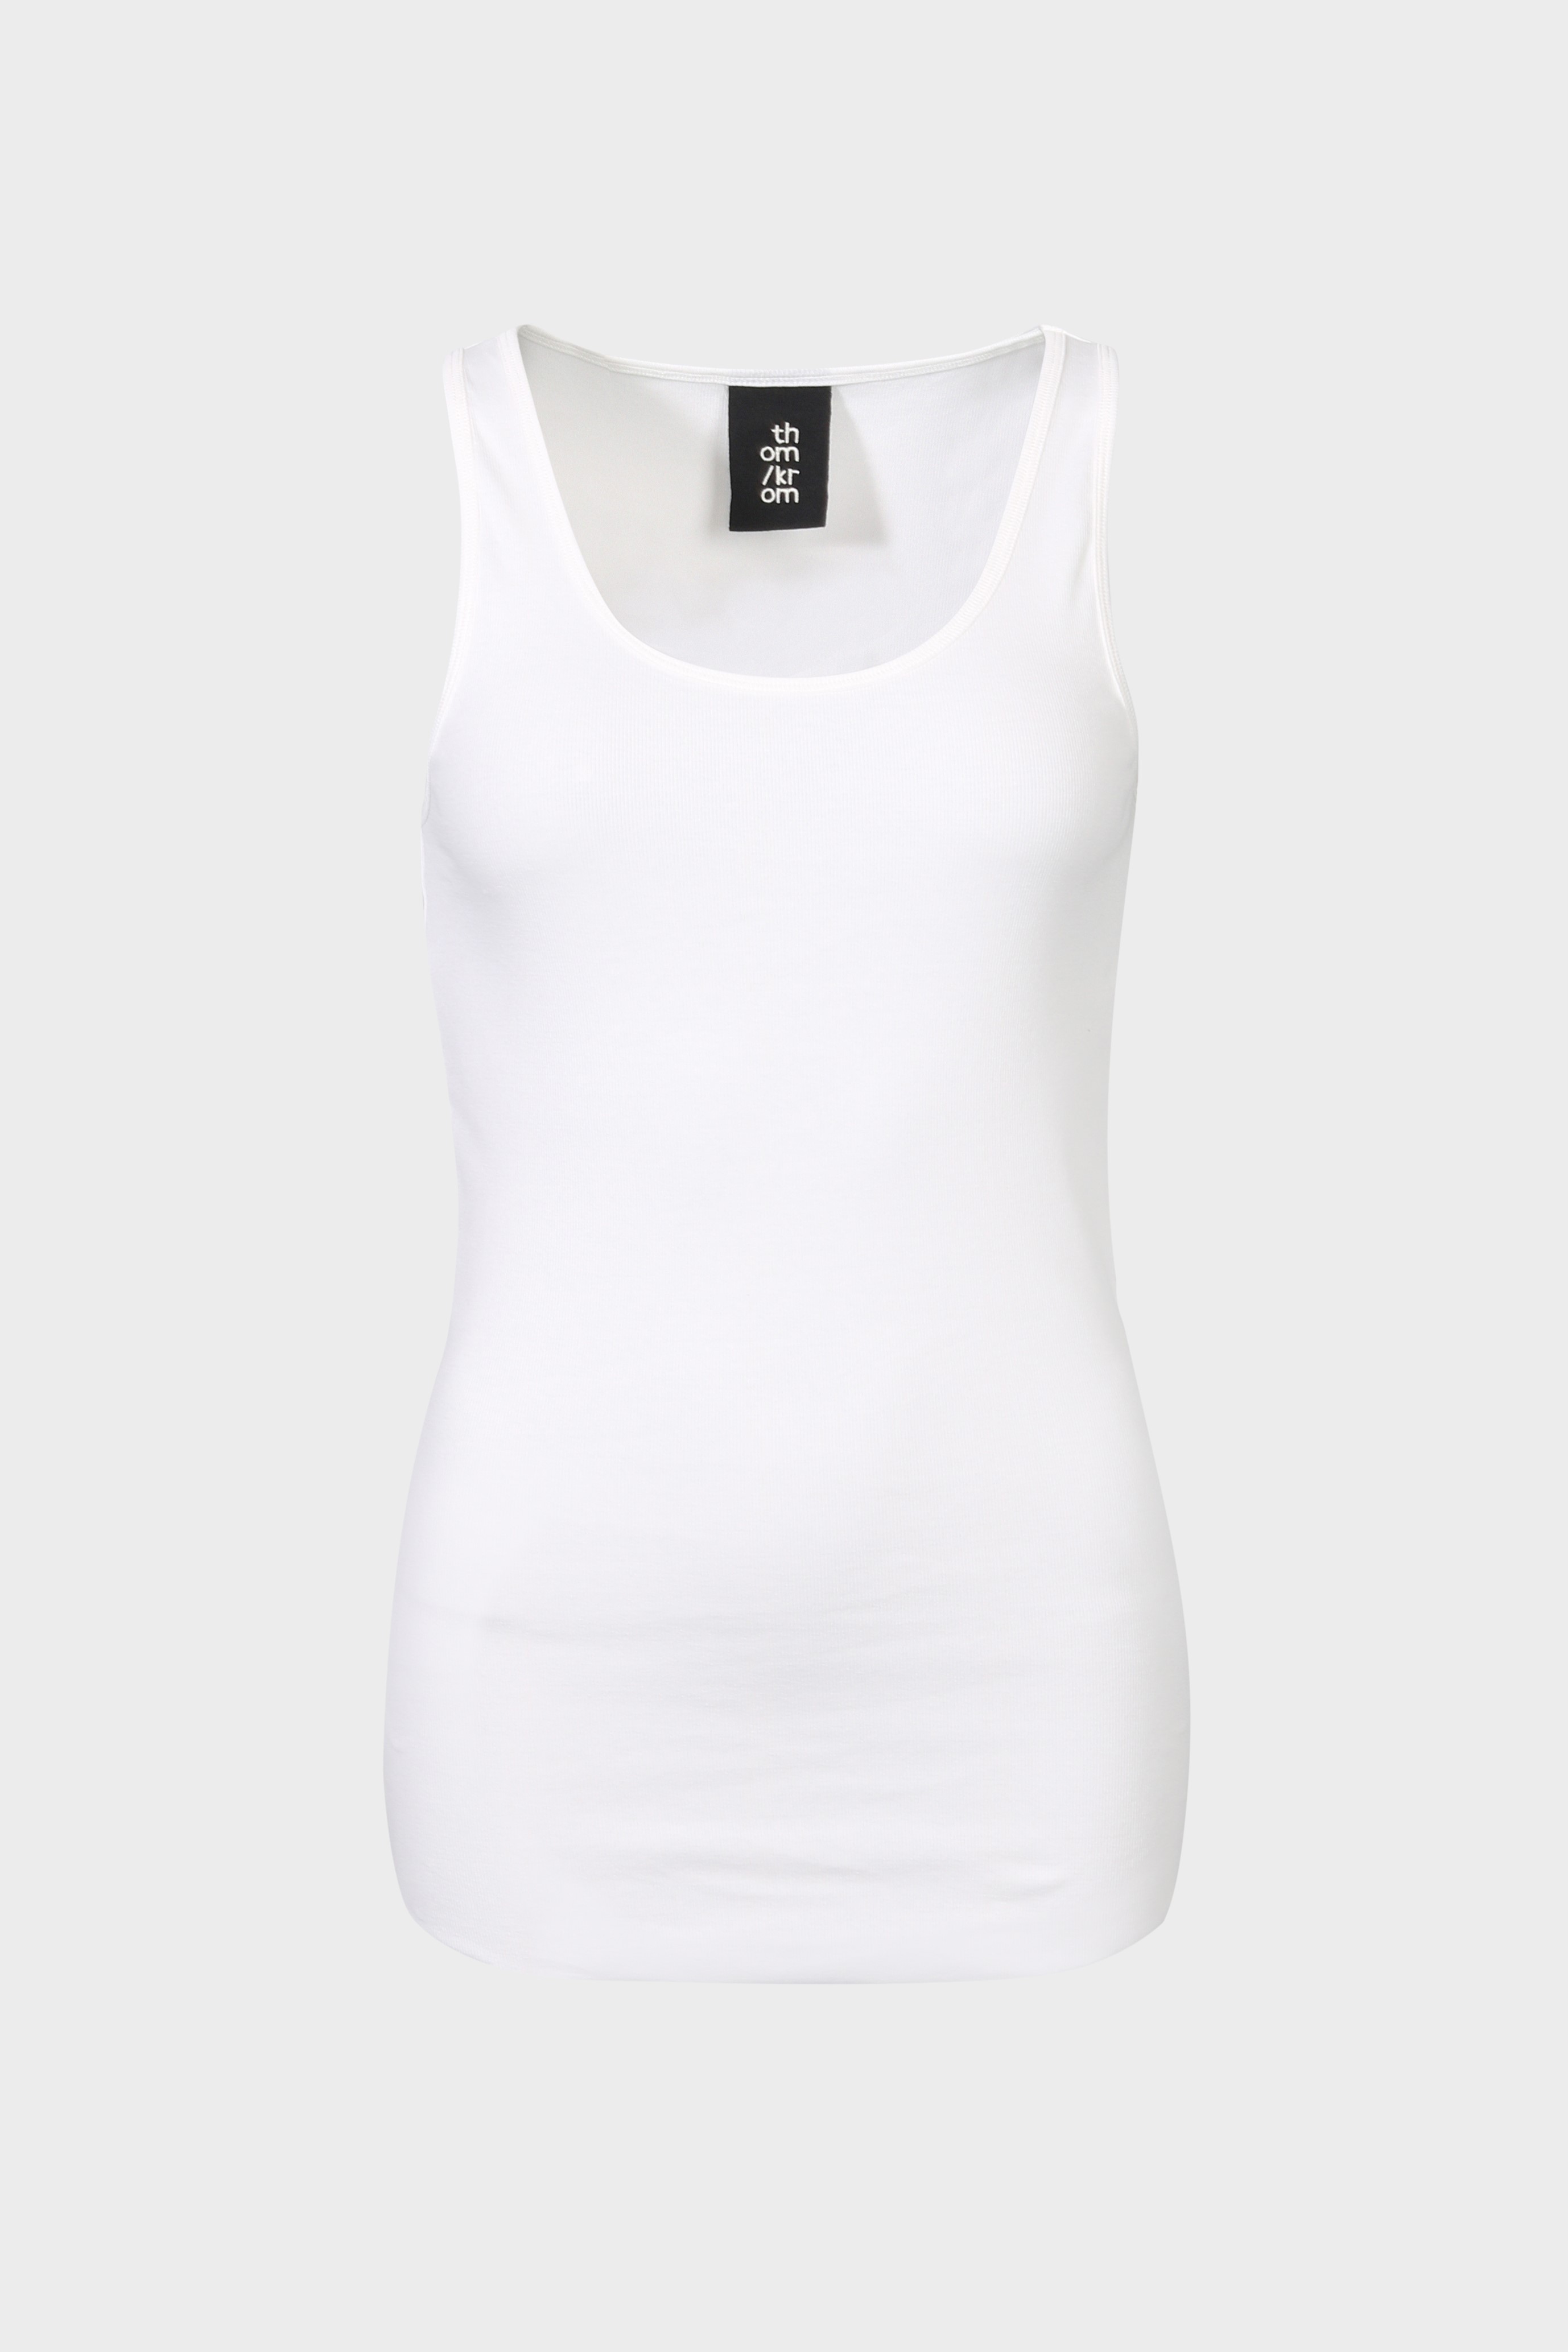 THOM KROM Tank Top in Off White